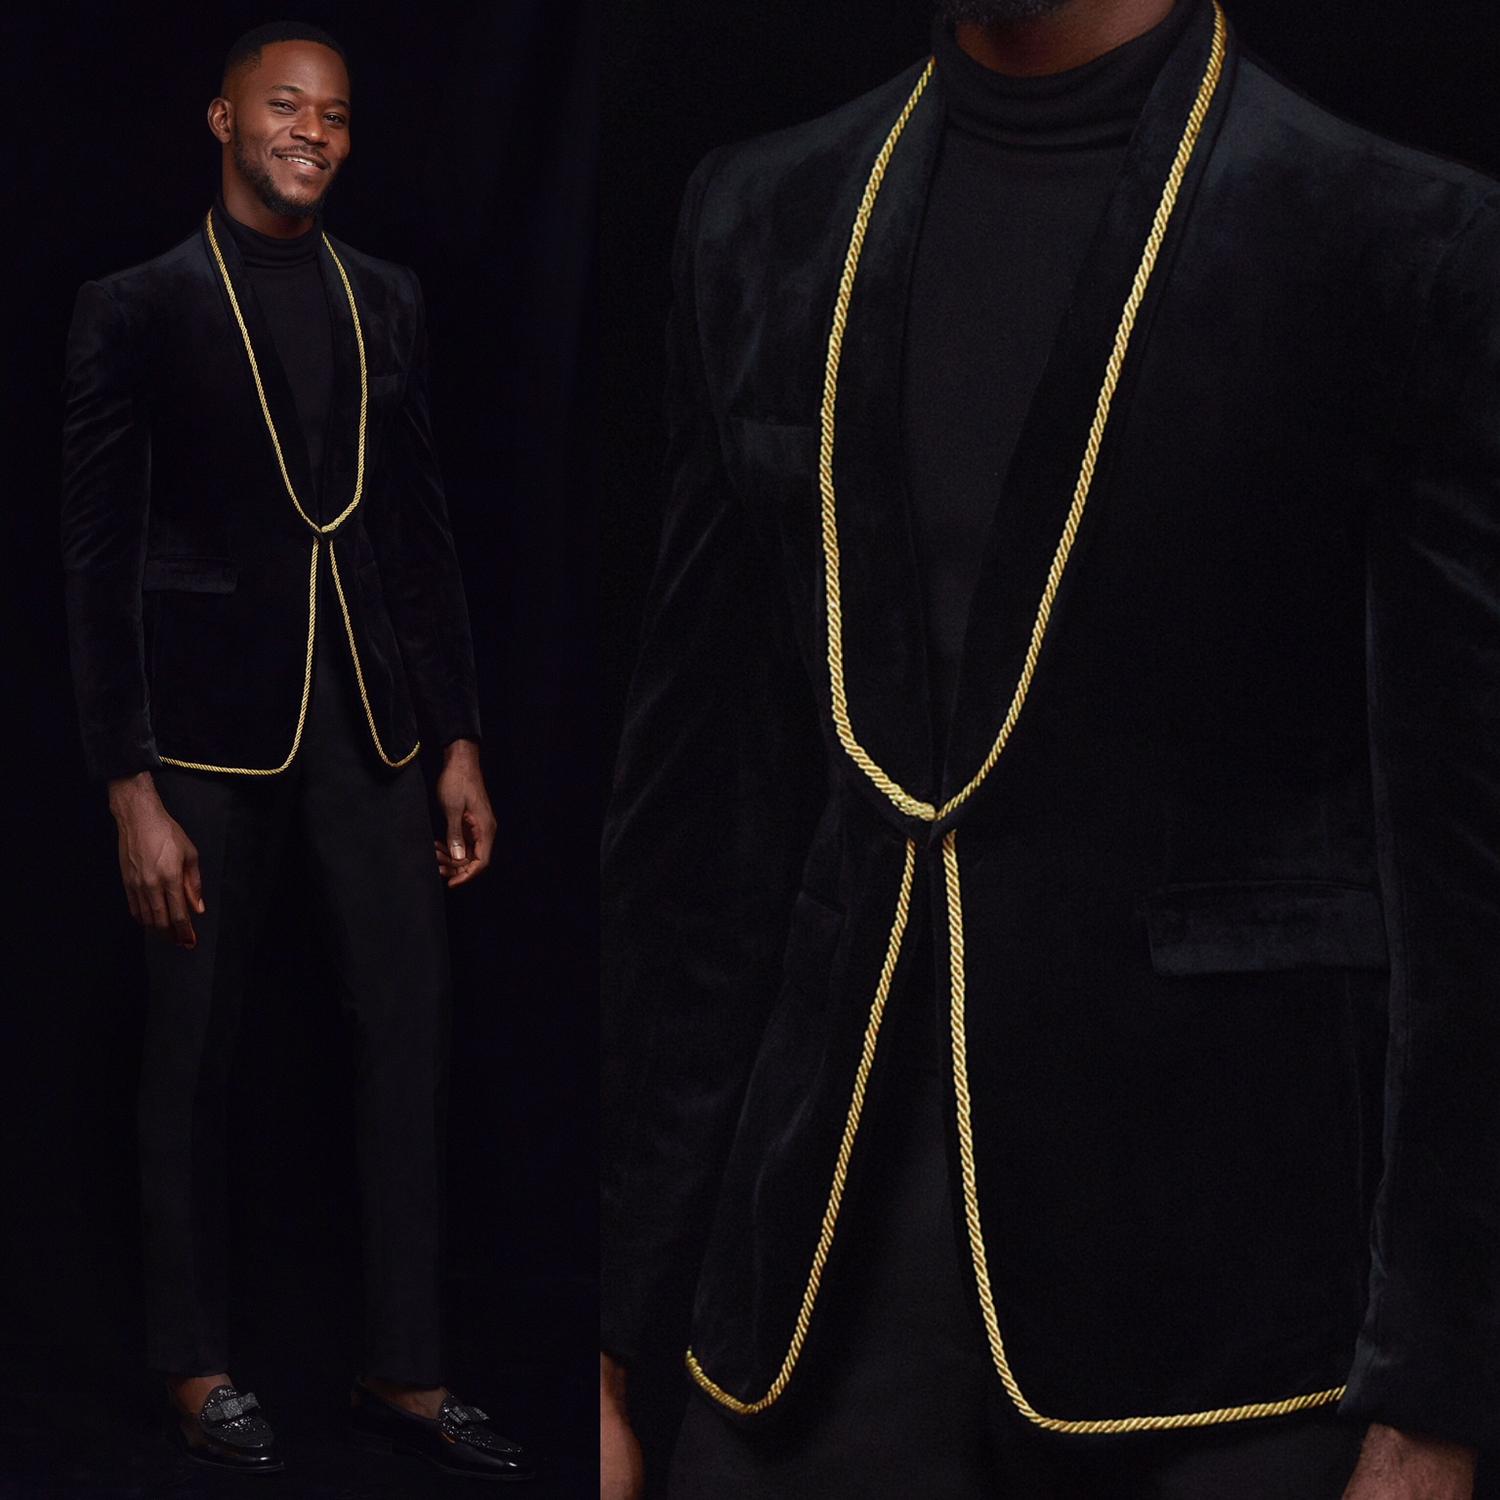 Adekunle Gold Shows Off his Gentlemanly Side for T.I Nathan’s “August” Lookbook